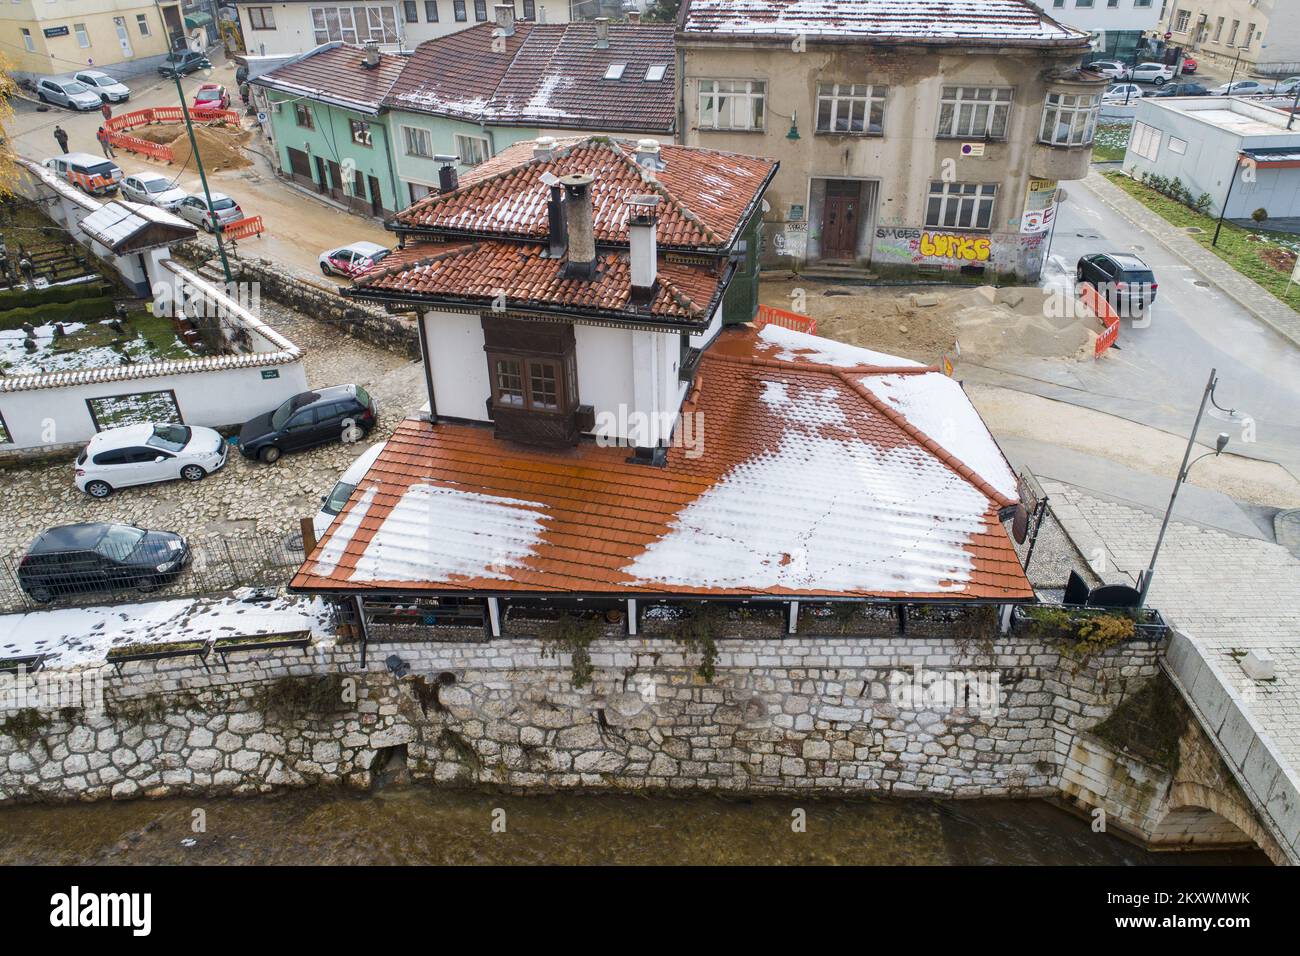 A picture taken by a drone shows Inat house (Spite house). When the location of the construction of the City Hall in Sarajevo was determined, the Austro-Hungarian authorities decided that the construction required the demolition of two restaurants and one house. The owner of the house did not allow it to be demolished for any reason. So, after long negotiations, he asked to be paid in ducats and to move his house to the other side of the coast, brick by brick. They did it and it has been called Inat House (Spite House) ever since. Today it houses a famous restaurant., in Sarajevo, Bosnia and H Stock Photo